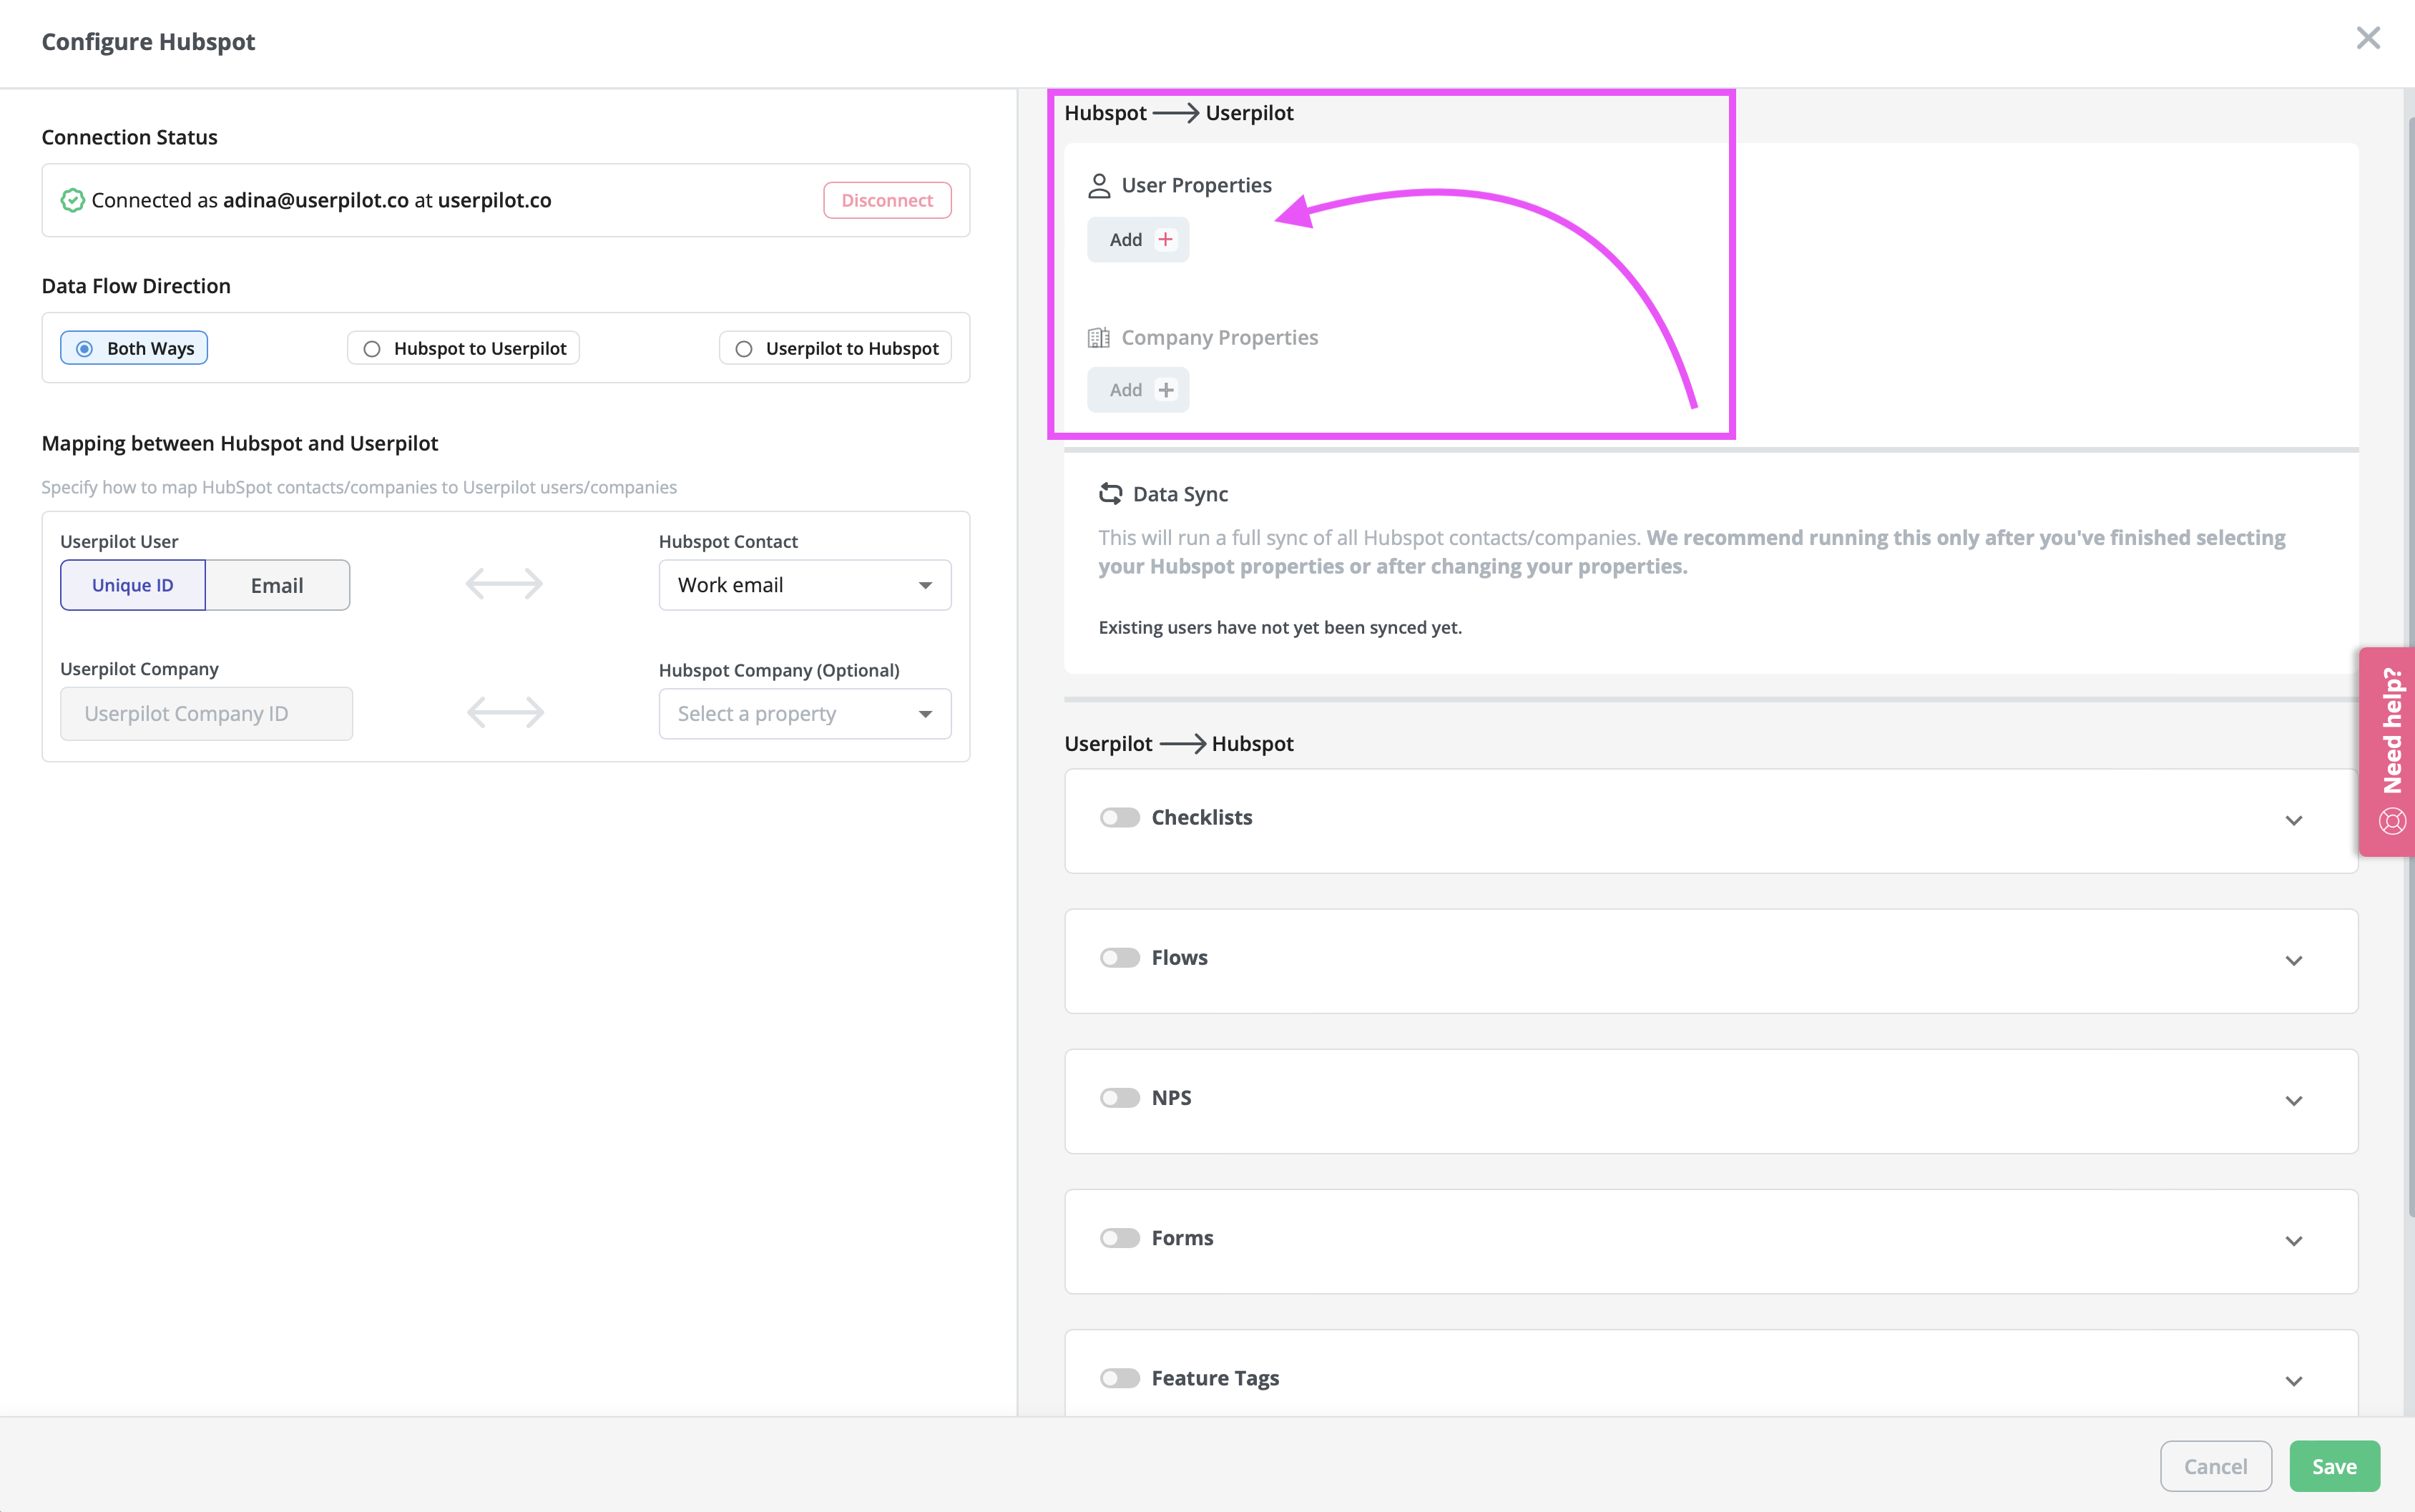 Connect Hubspot with Userpilot to adopt an omnichannel engagement strategy